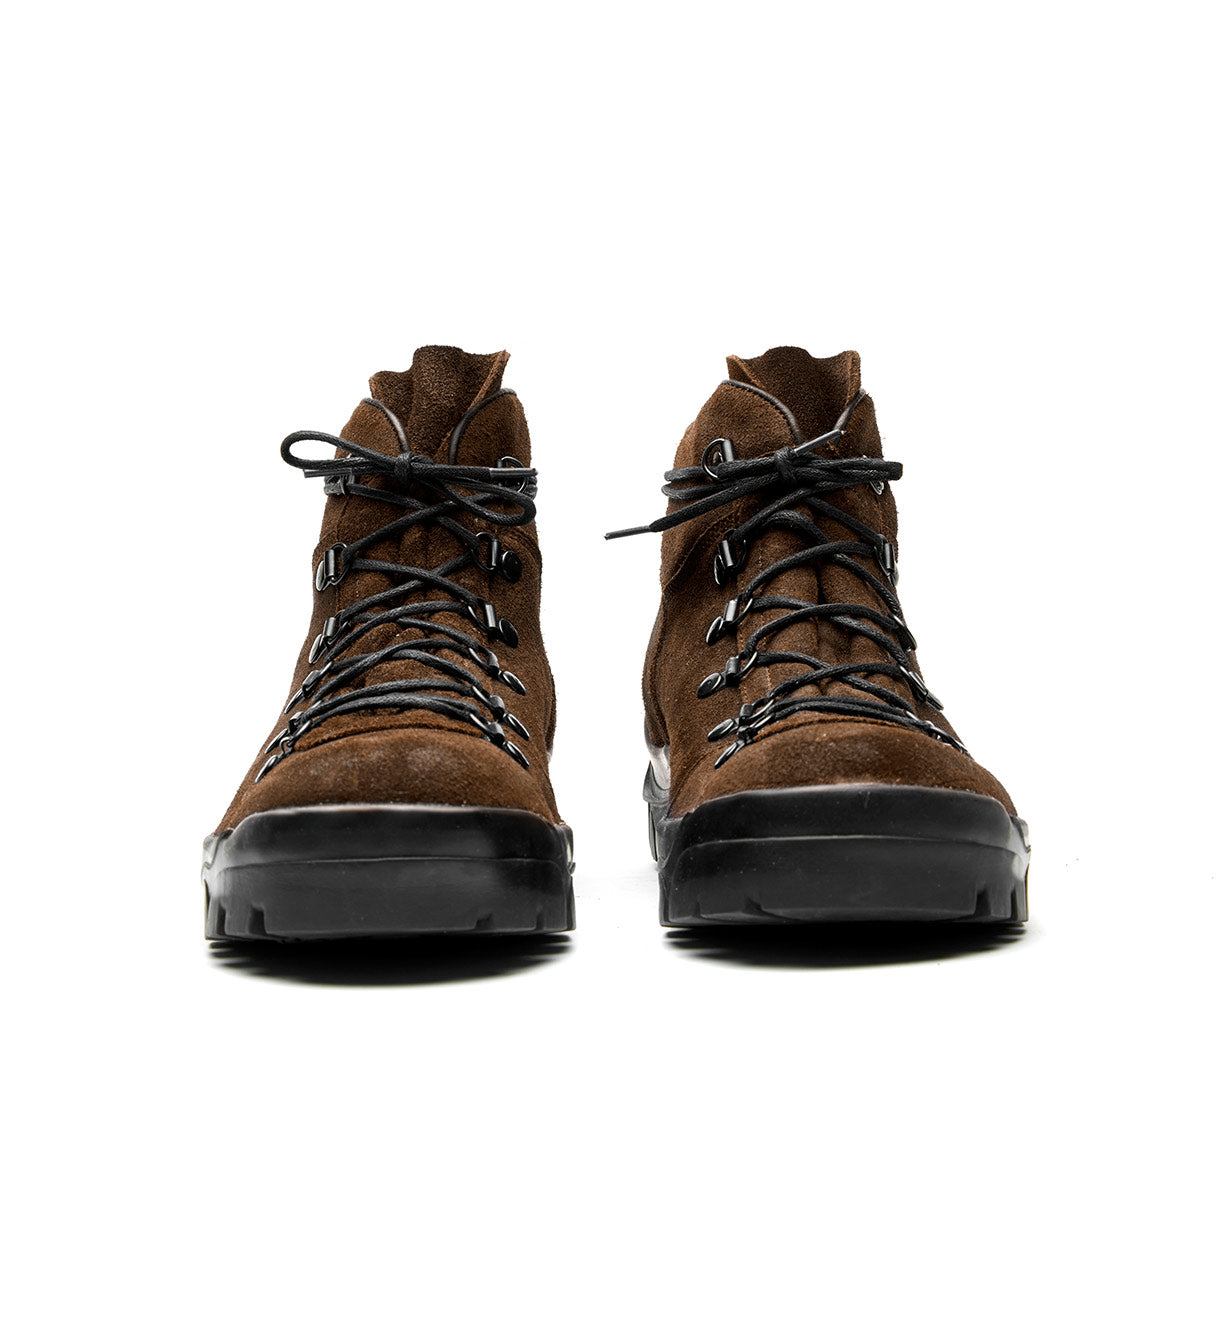 A pair of brown Broken Homme Weber hiking boots with a crossover boot design on a white background.